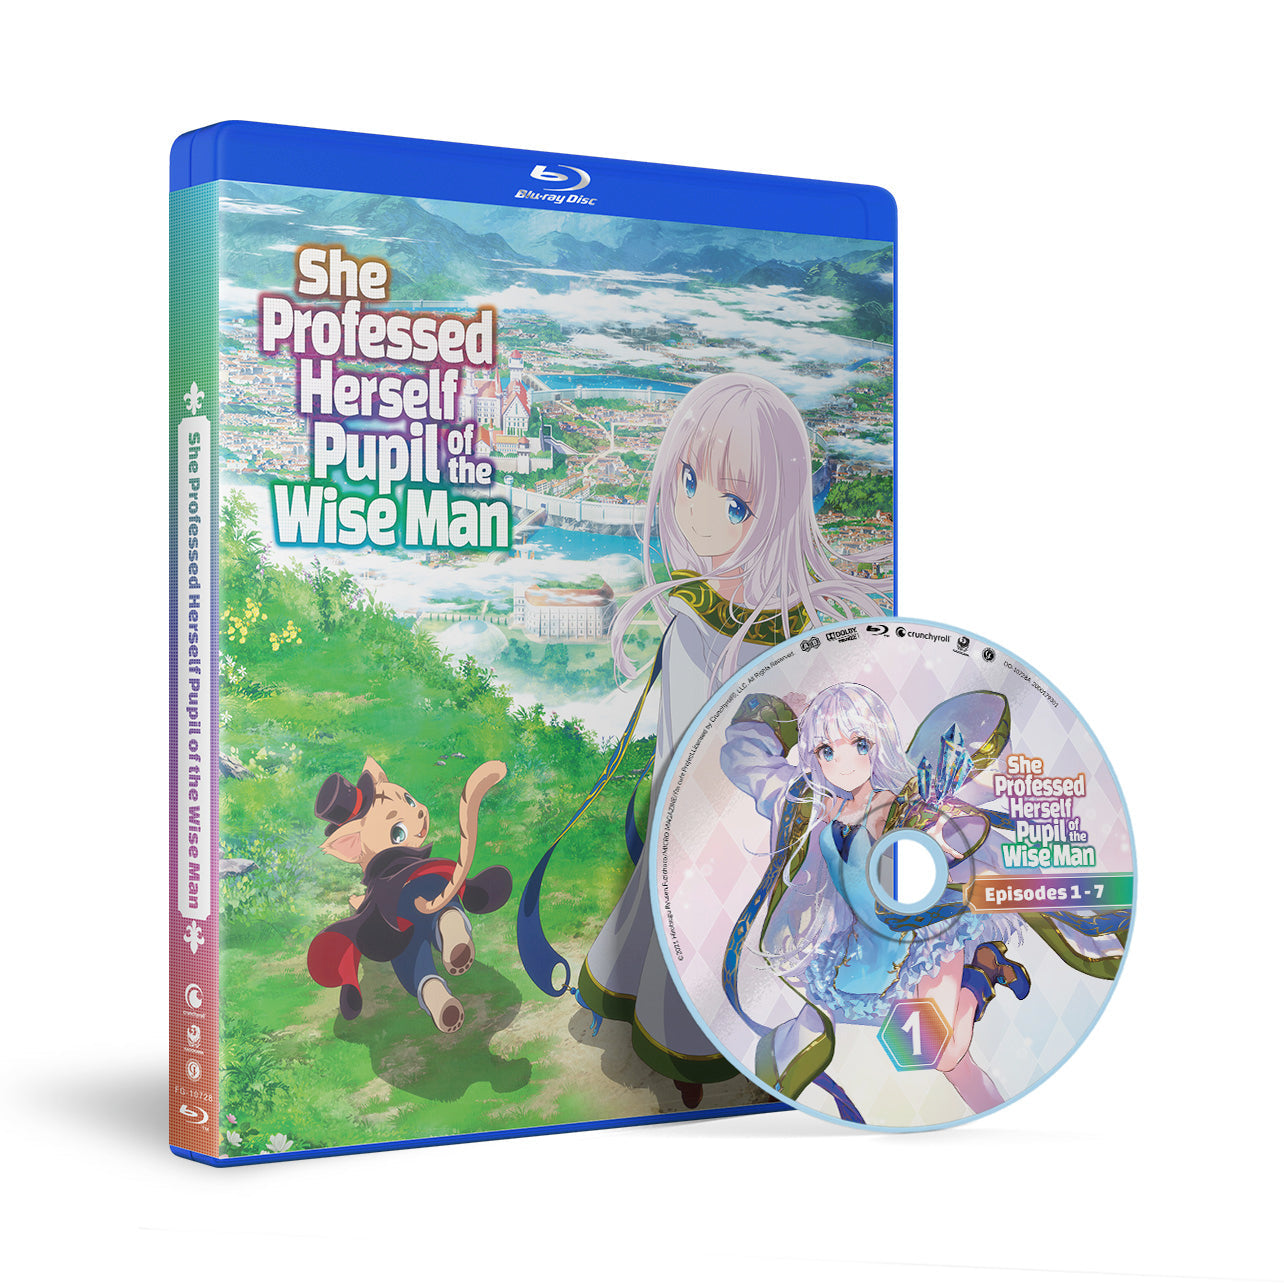 She Professed Herself Pupil of the Wise Man - The Complete Season - Blu-ray image count 1